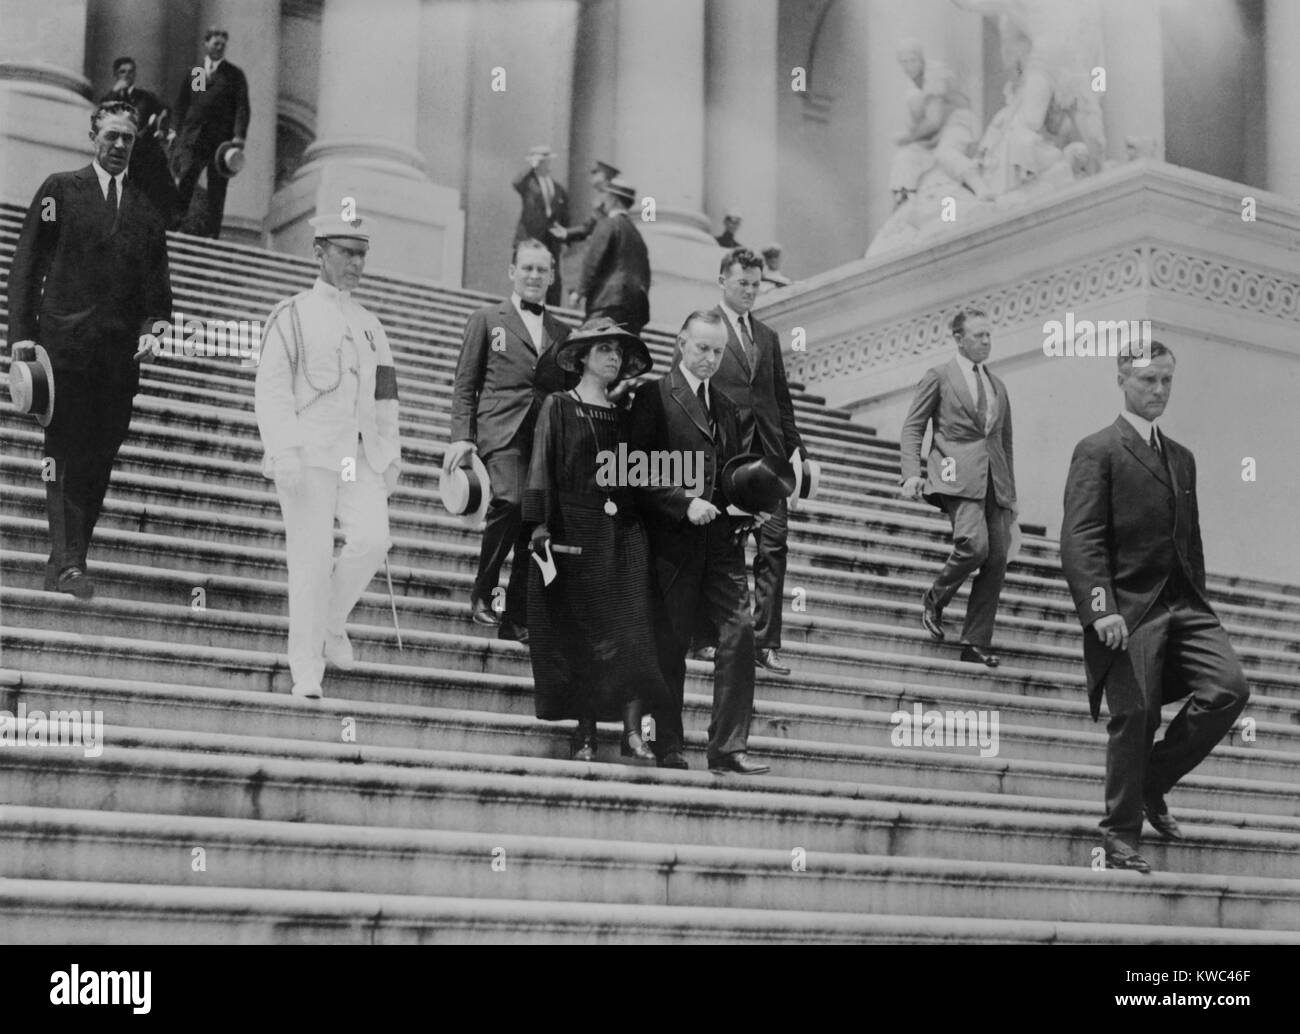 President Calvin Coolidge and the First Lady leave the Capitol after Warren Harding funeral. August 8, 1923. President Coolidge wore a formal suit with silk edging, while some near him are wearing standard business suit. (BSLOC 2015 15 104) Stock Photo